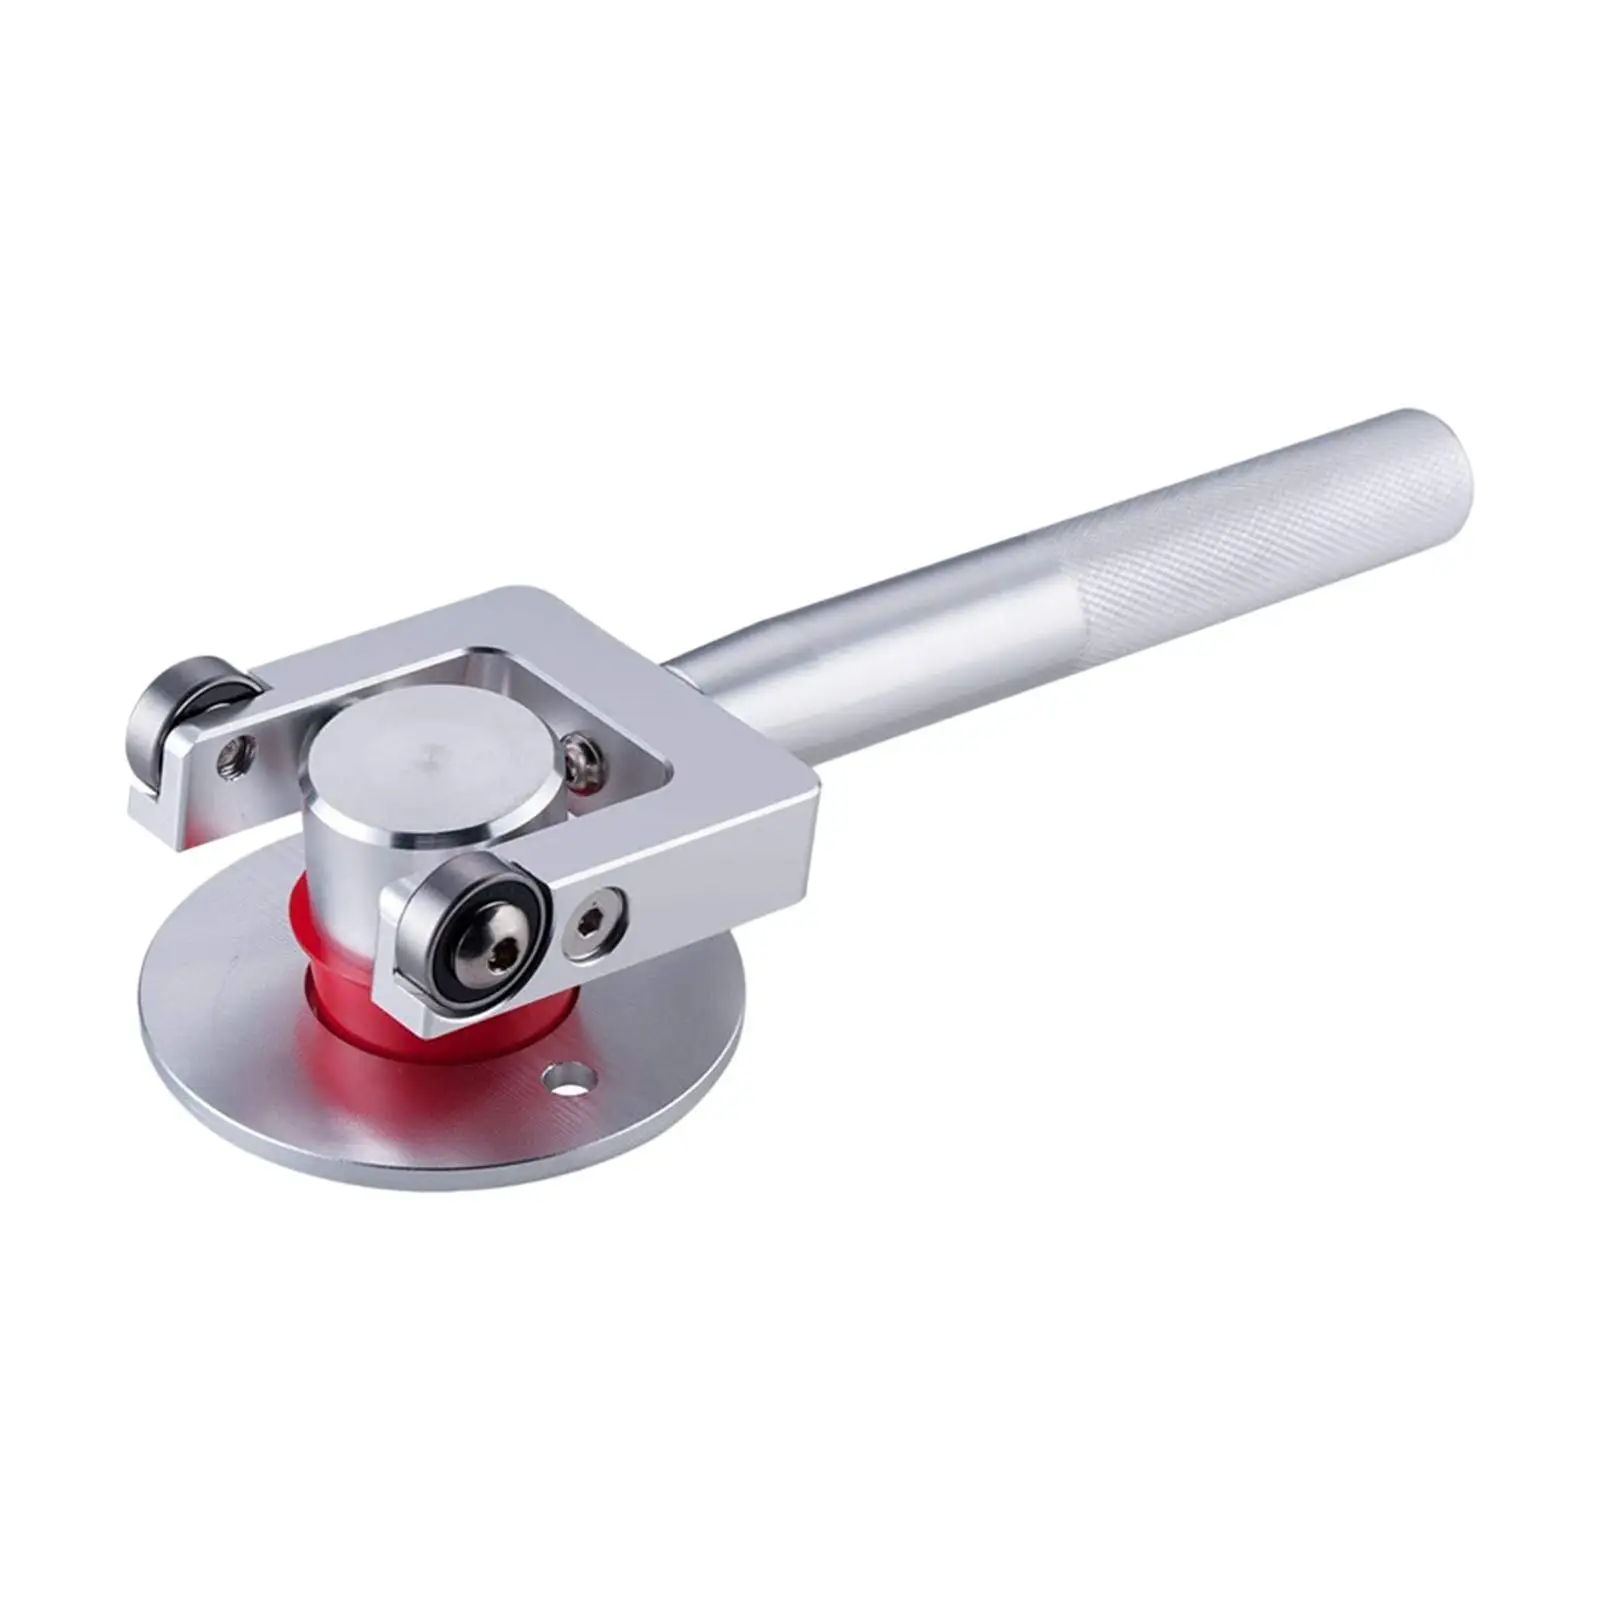 Belt Changing Tool Clutch Removal Tool Smooth Roller Portable for 72/64 Wheel Base Width Lightweight Durable Accessory